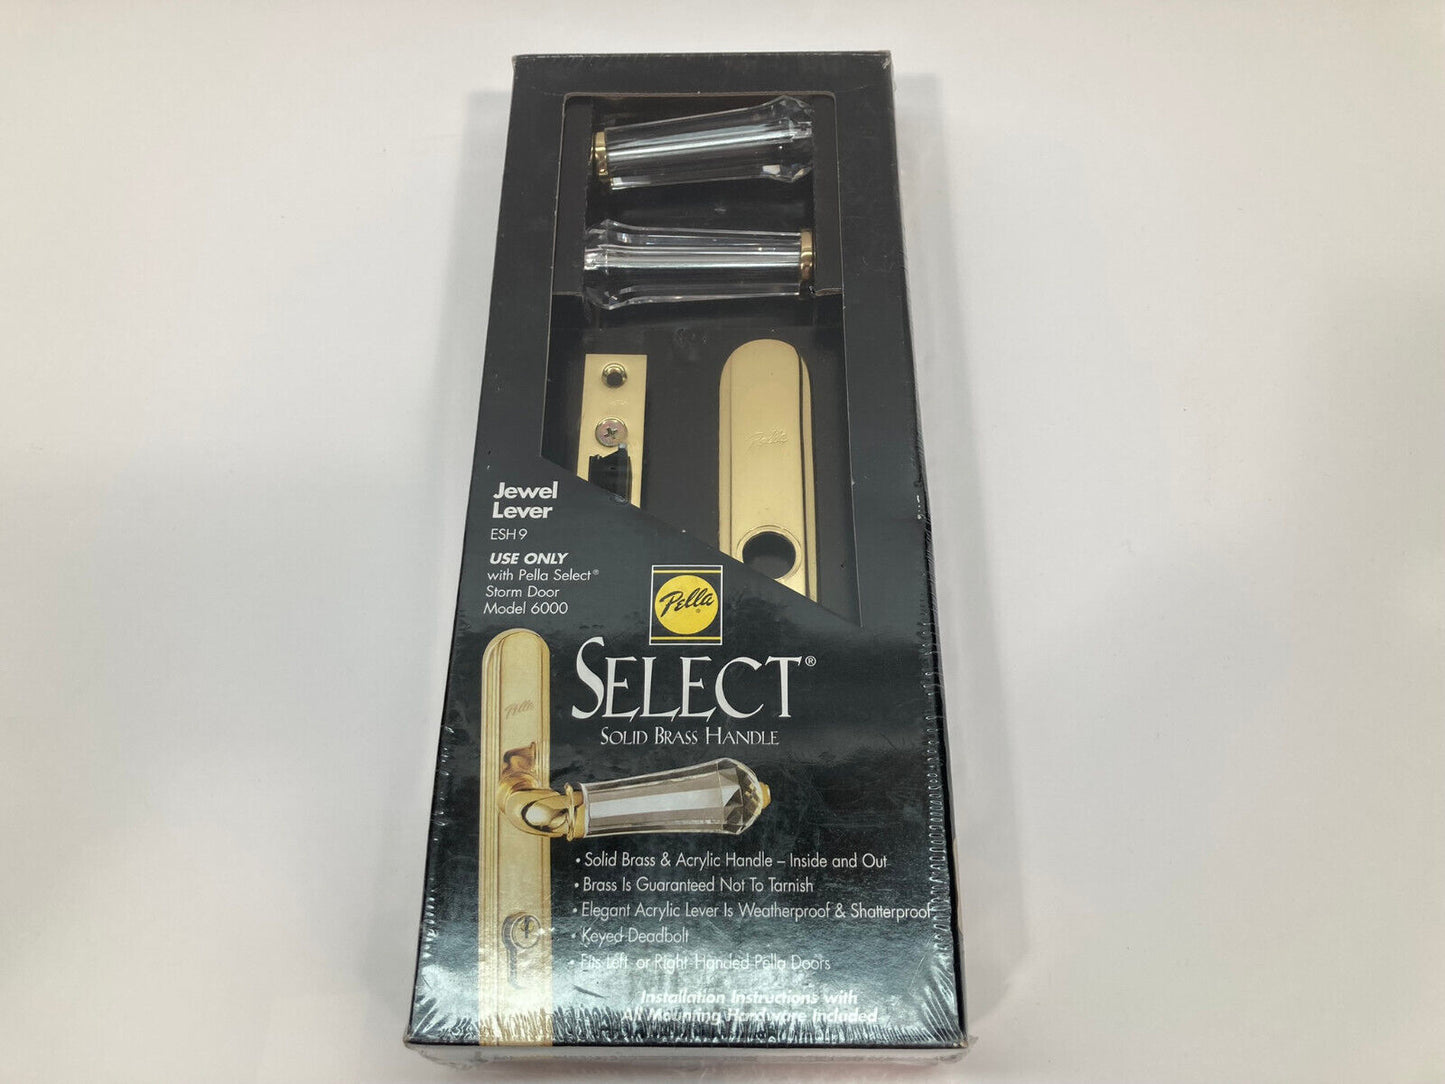 Pella Select Solid Brass Jewel Lever Handle ESH 9 New Sealed